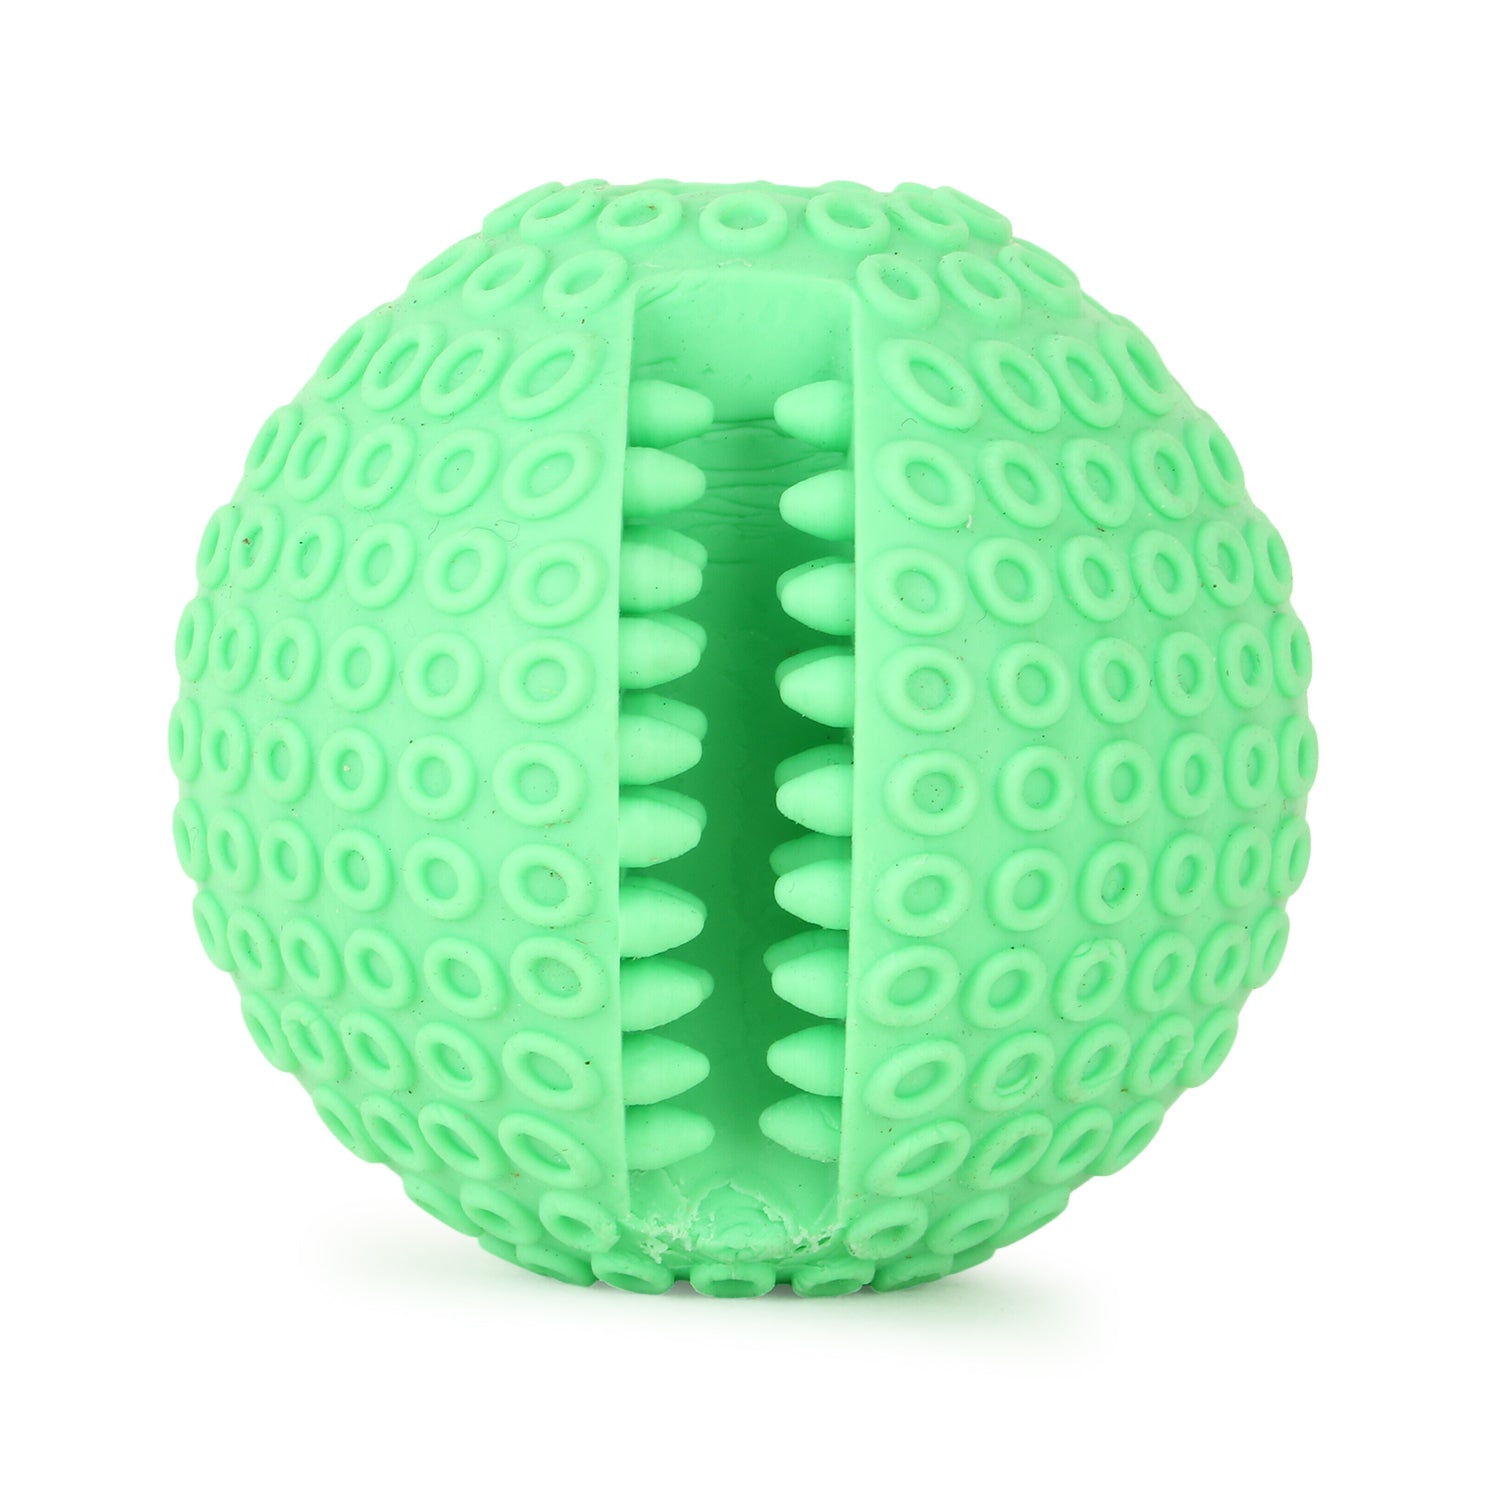 Basil Solid Ball with Hollow centre & Grooves in Side for Treats Green